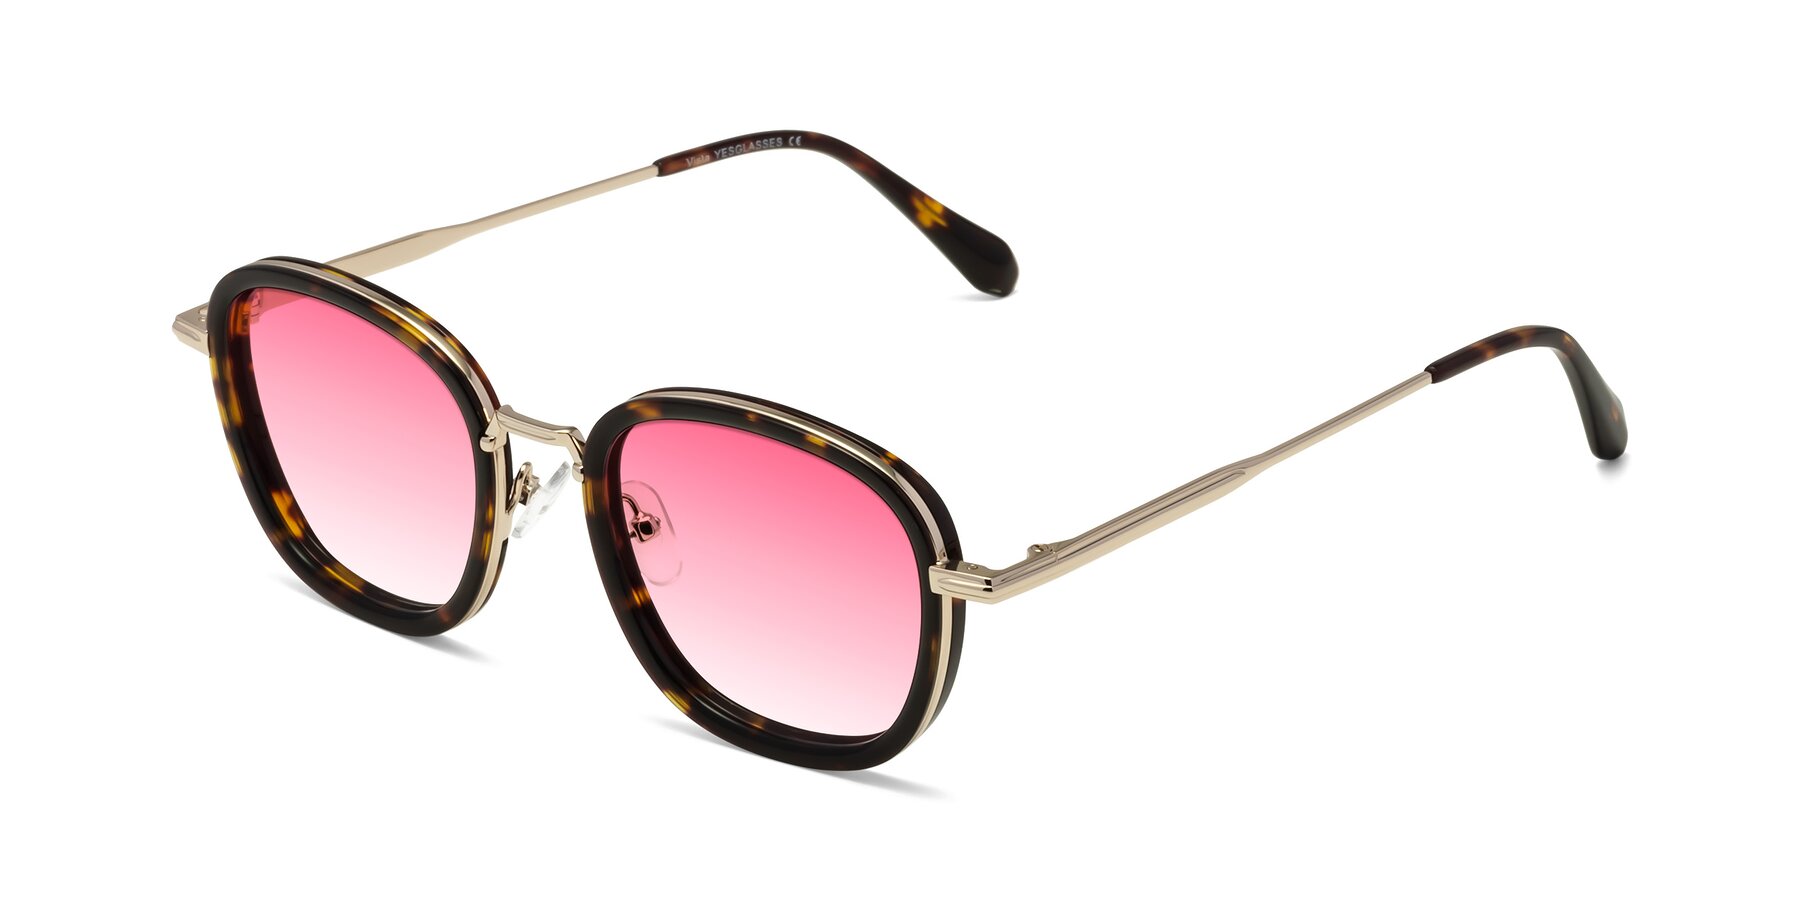 Angle of Vista in Tortoise-Light Gold with Pink Gradient Lenses